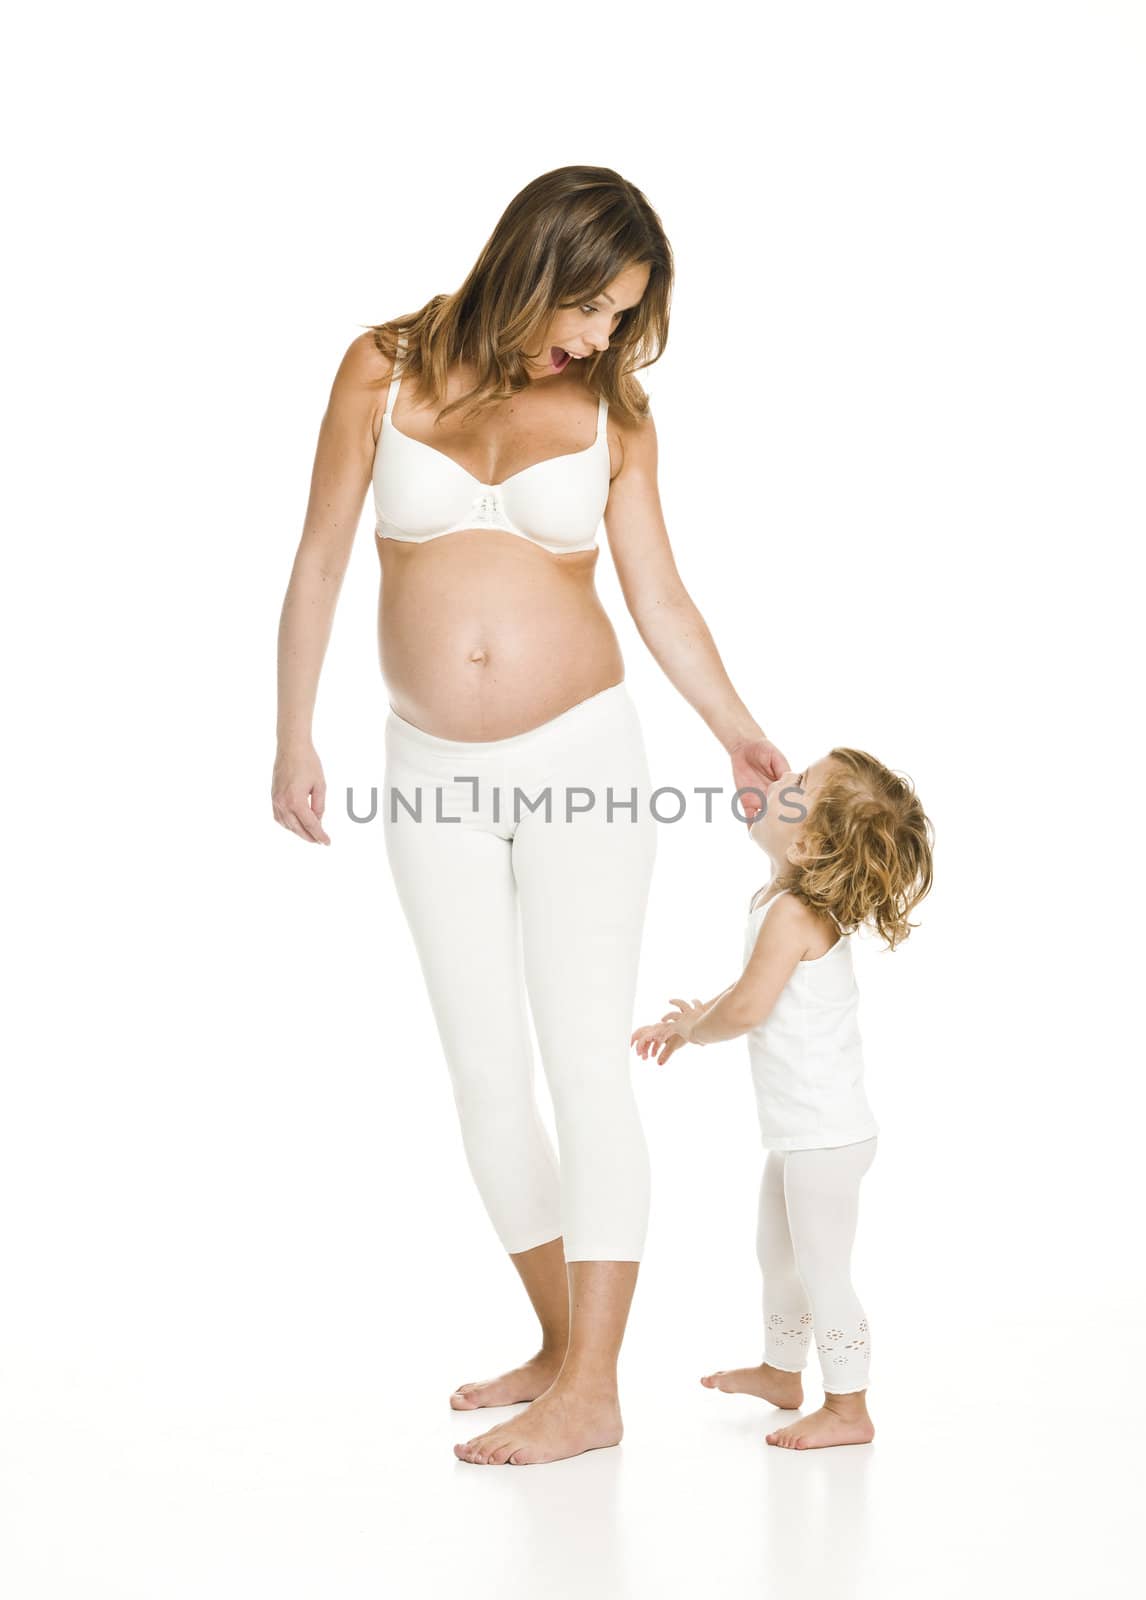 Pregnant woman with her daughter by gemenacom